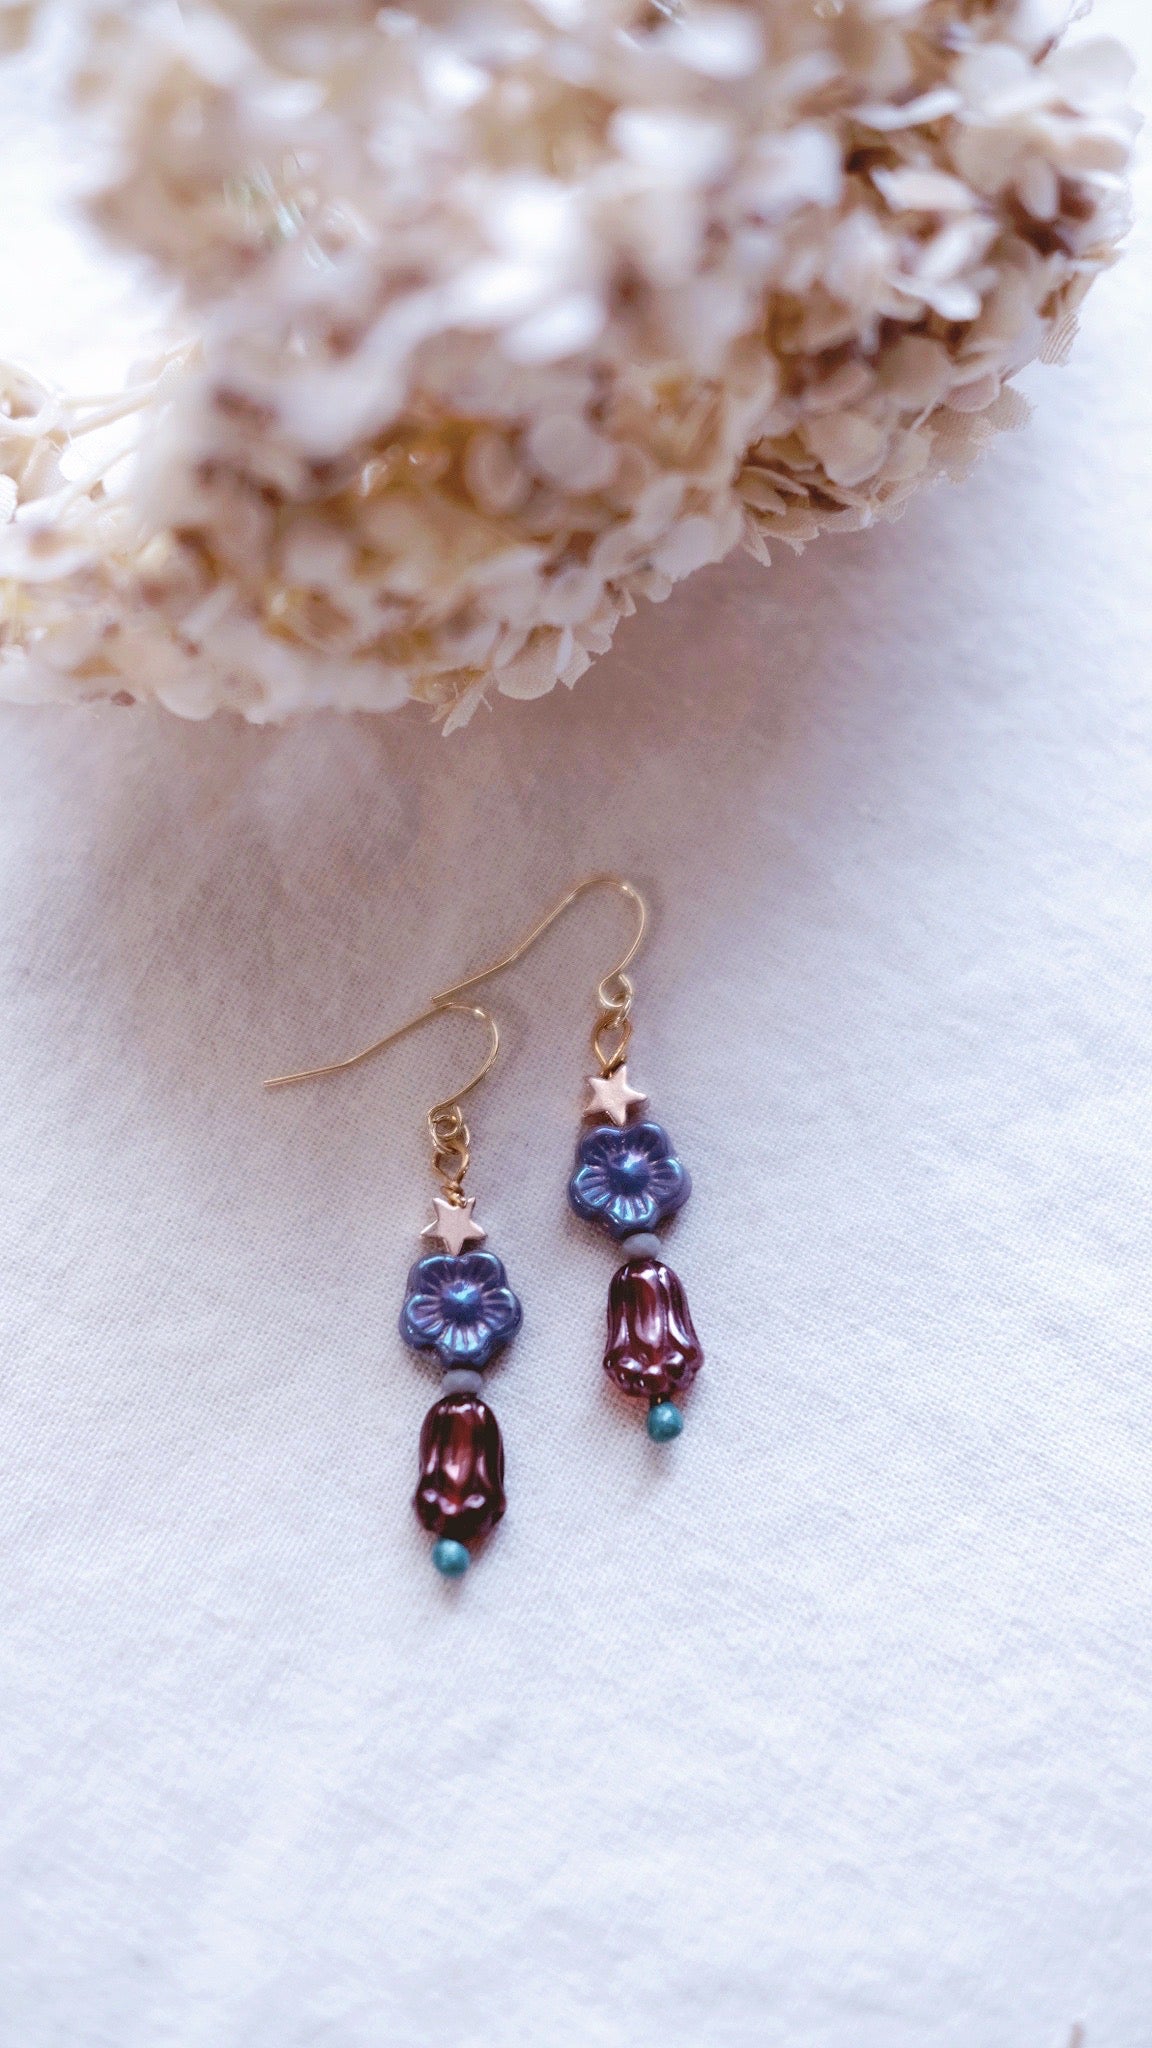 Star Lanterns + Pressed flowers, Chalcedony, and Ruby Glass earrings